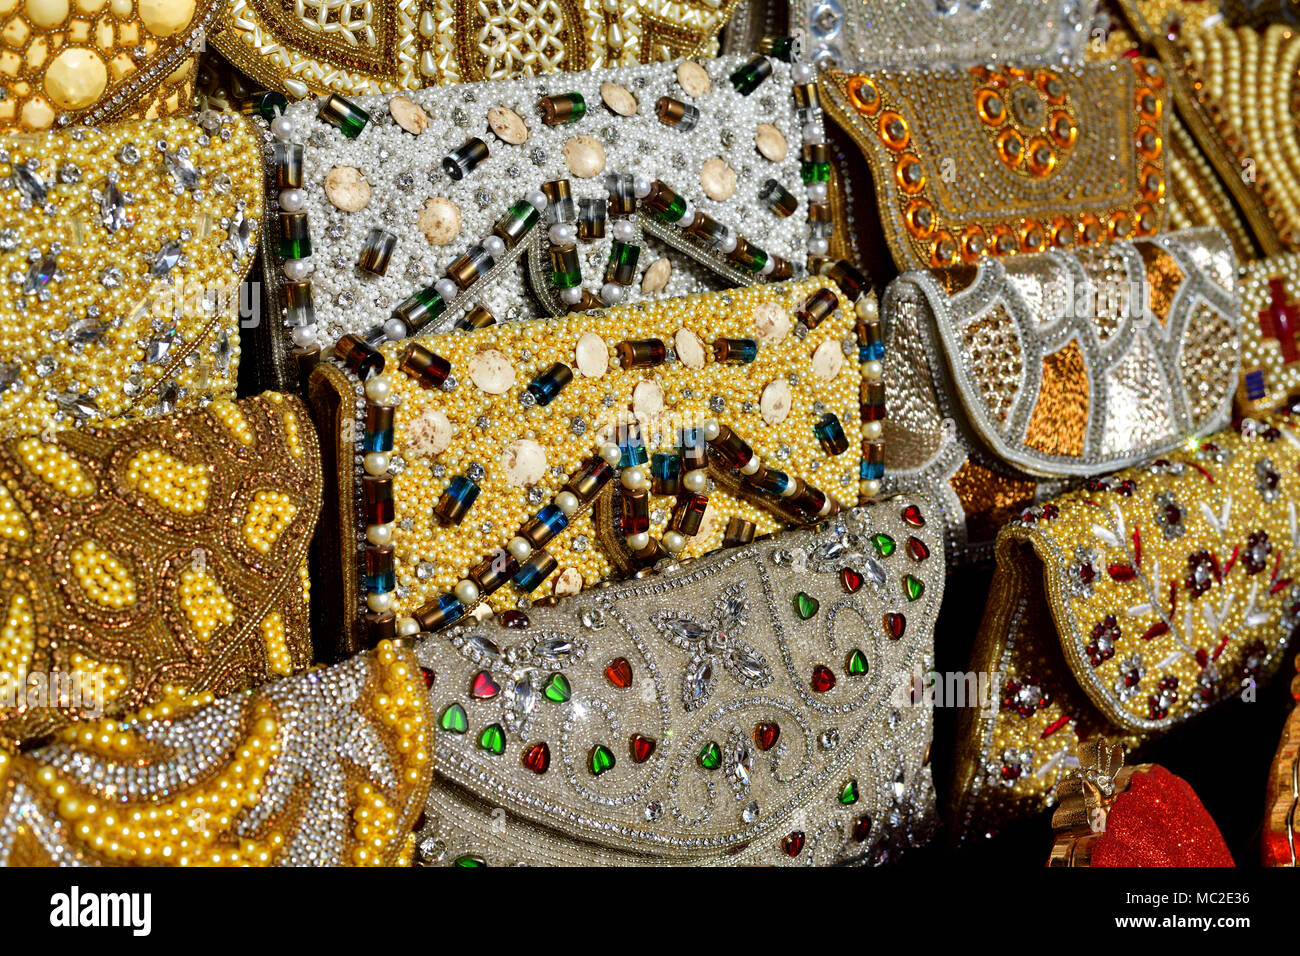 women's handbag decorated with semiprecious stones and beads on market in UAE Stock Photo